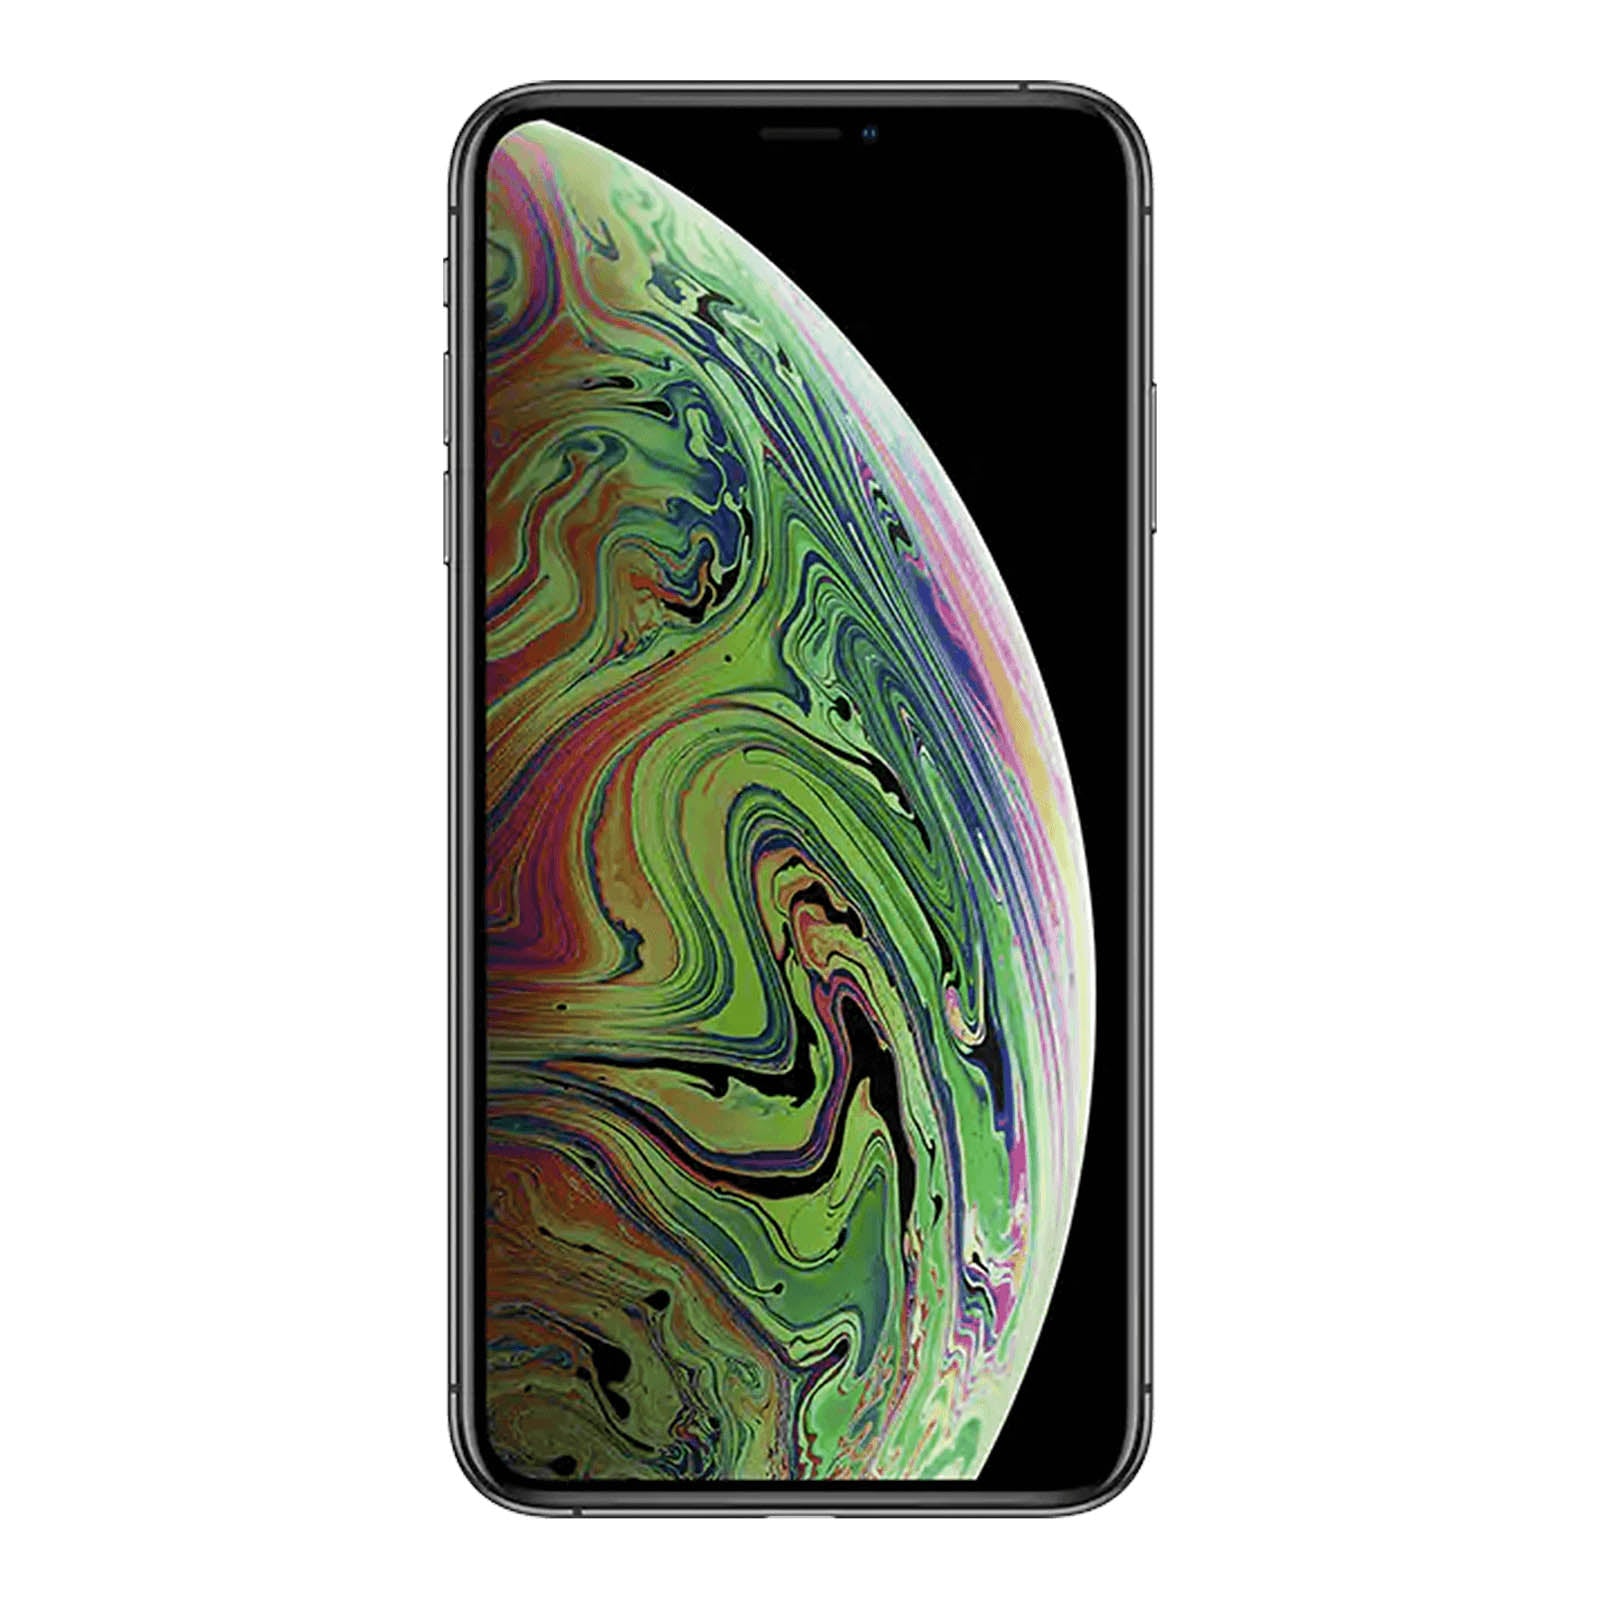 Apple iPhone XS 256GB Space Grey Pristine - AT&T